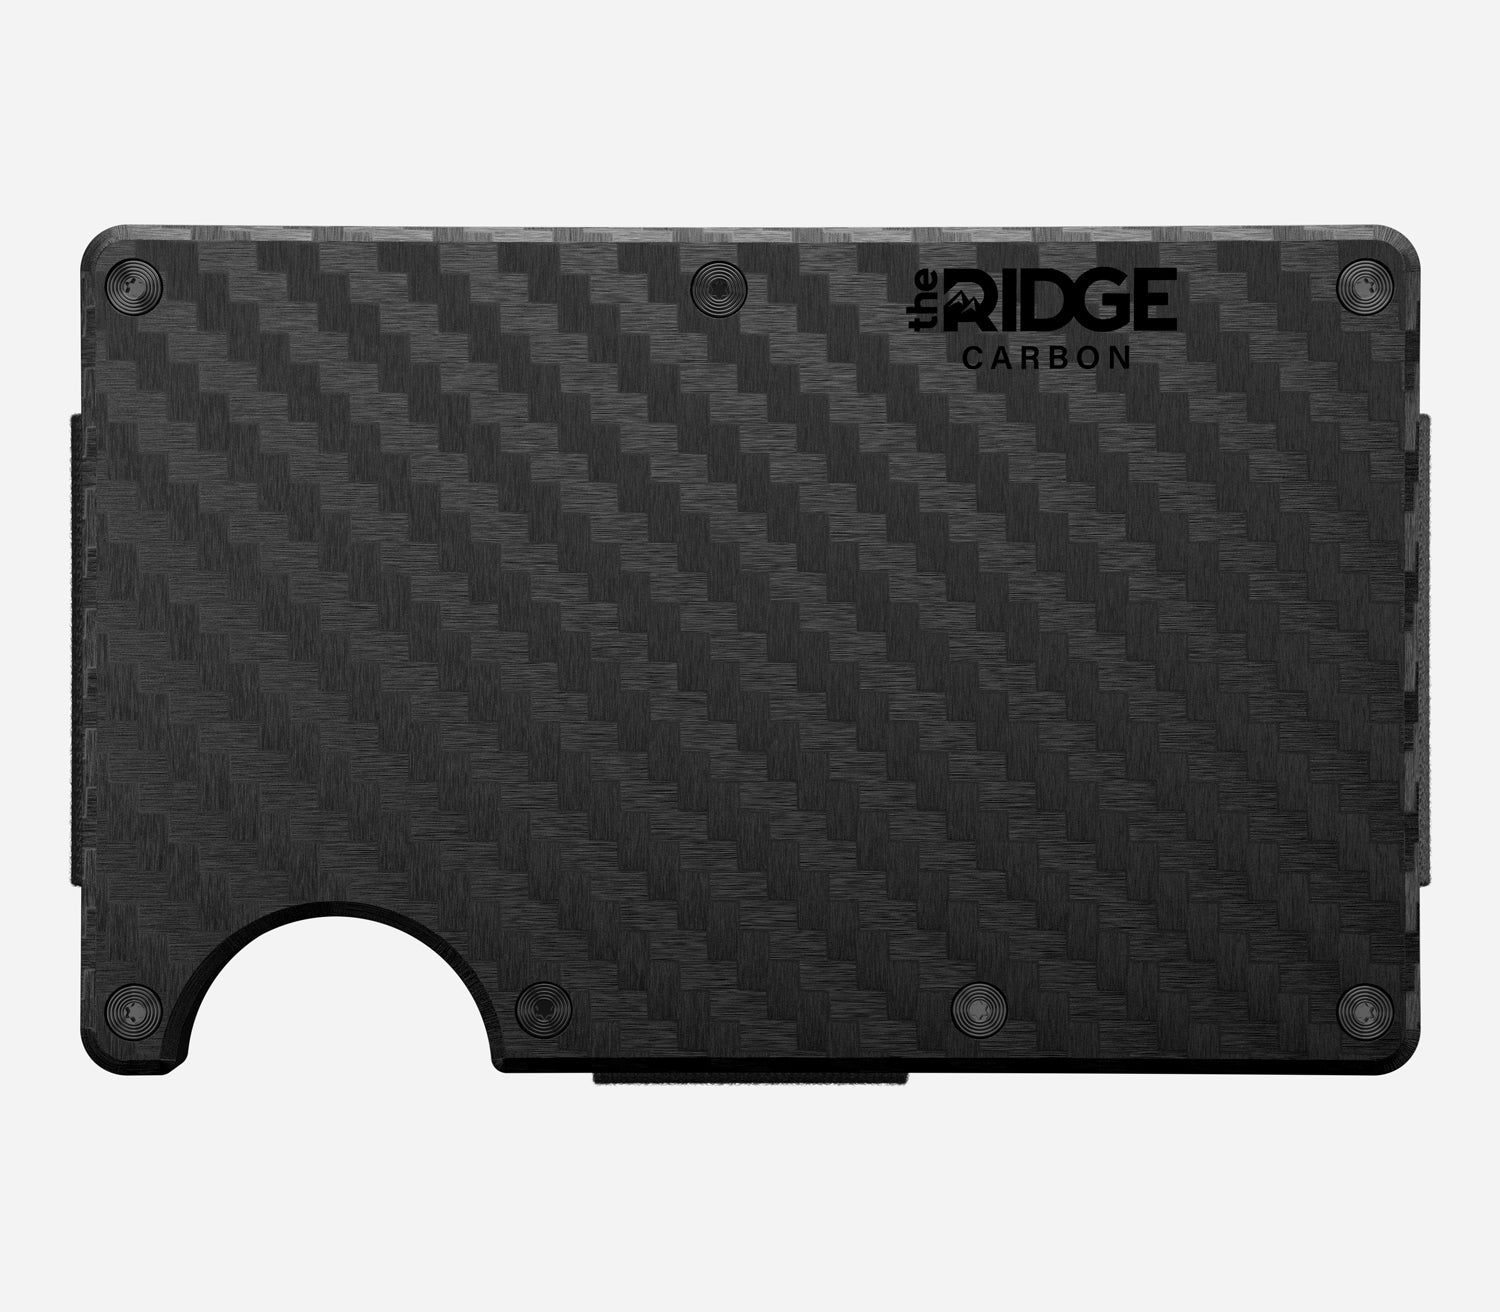 The Ridge Wallet Review - 1 Year Later 